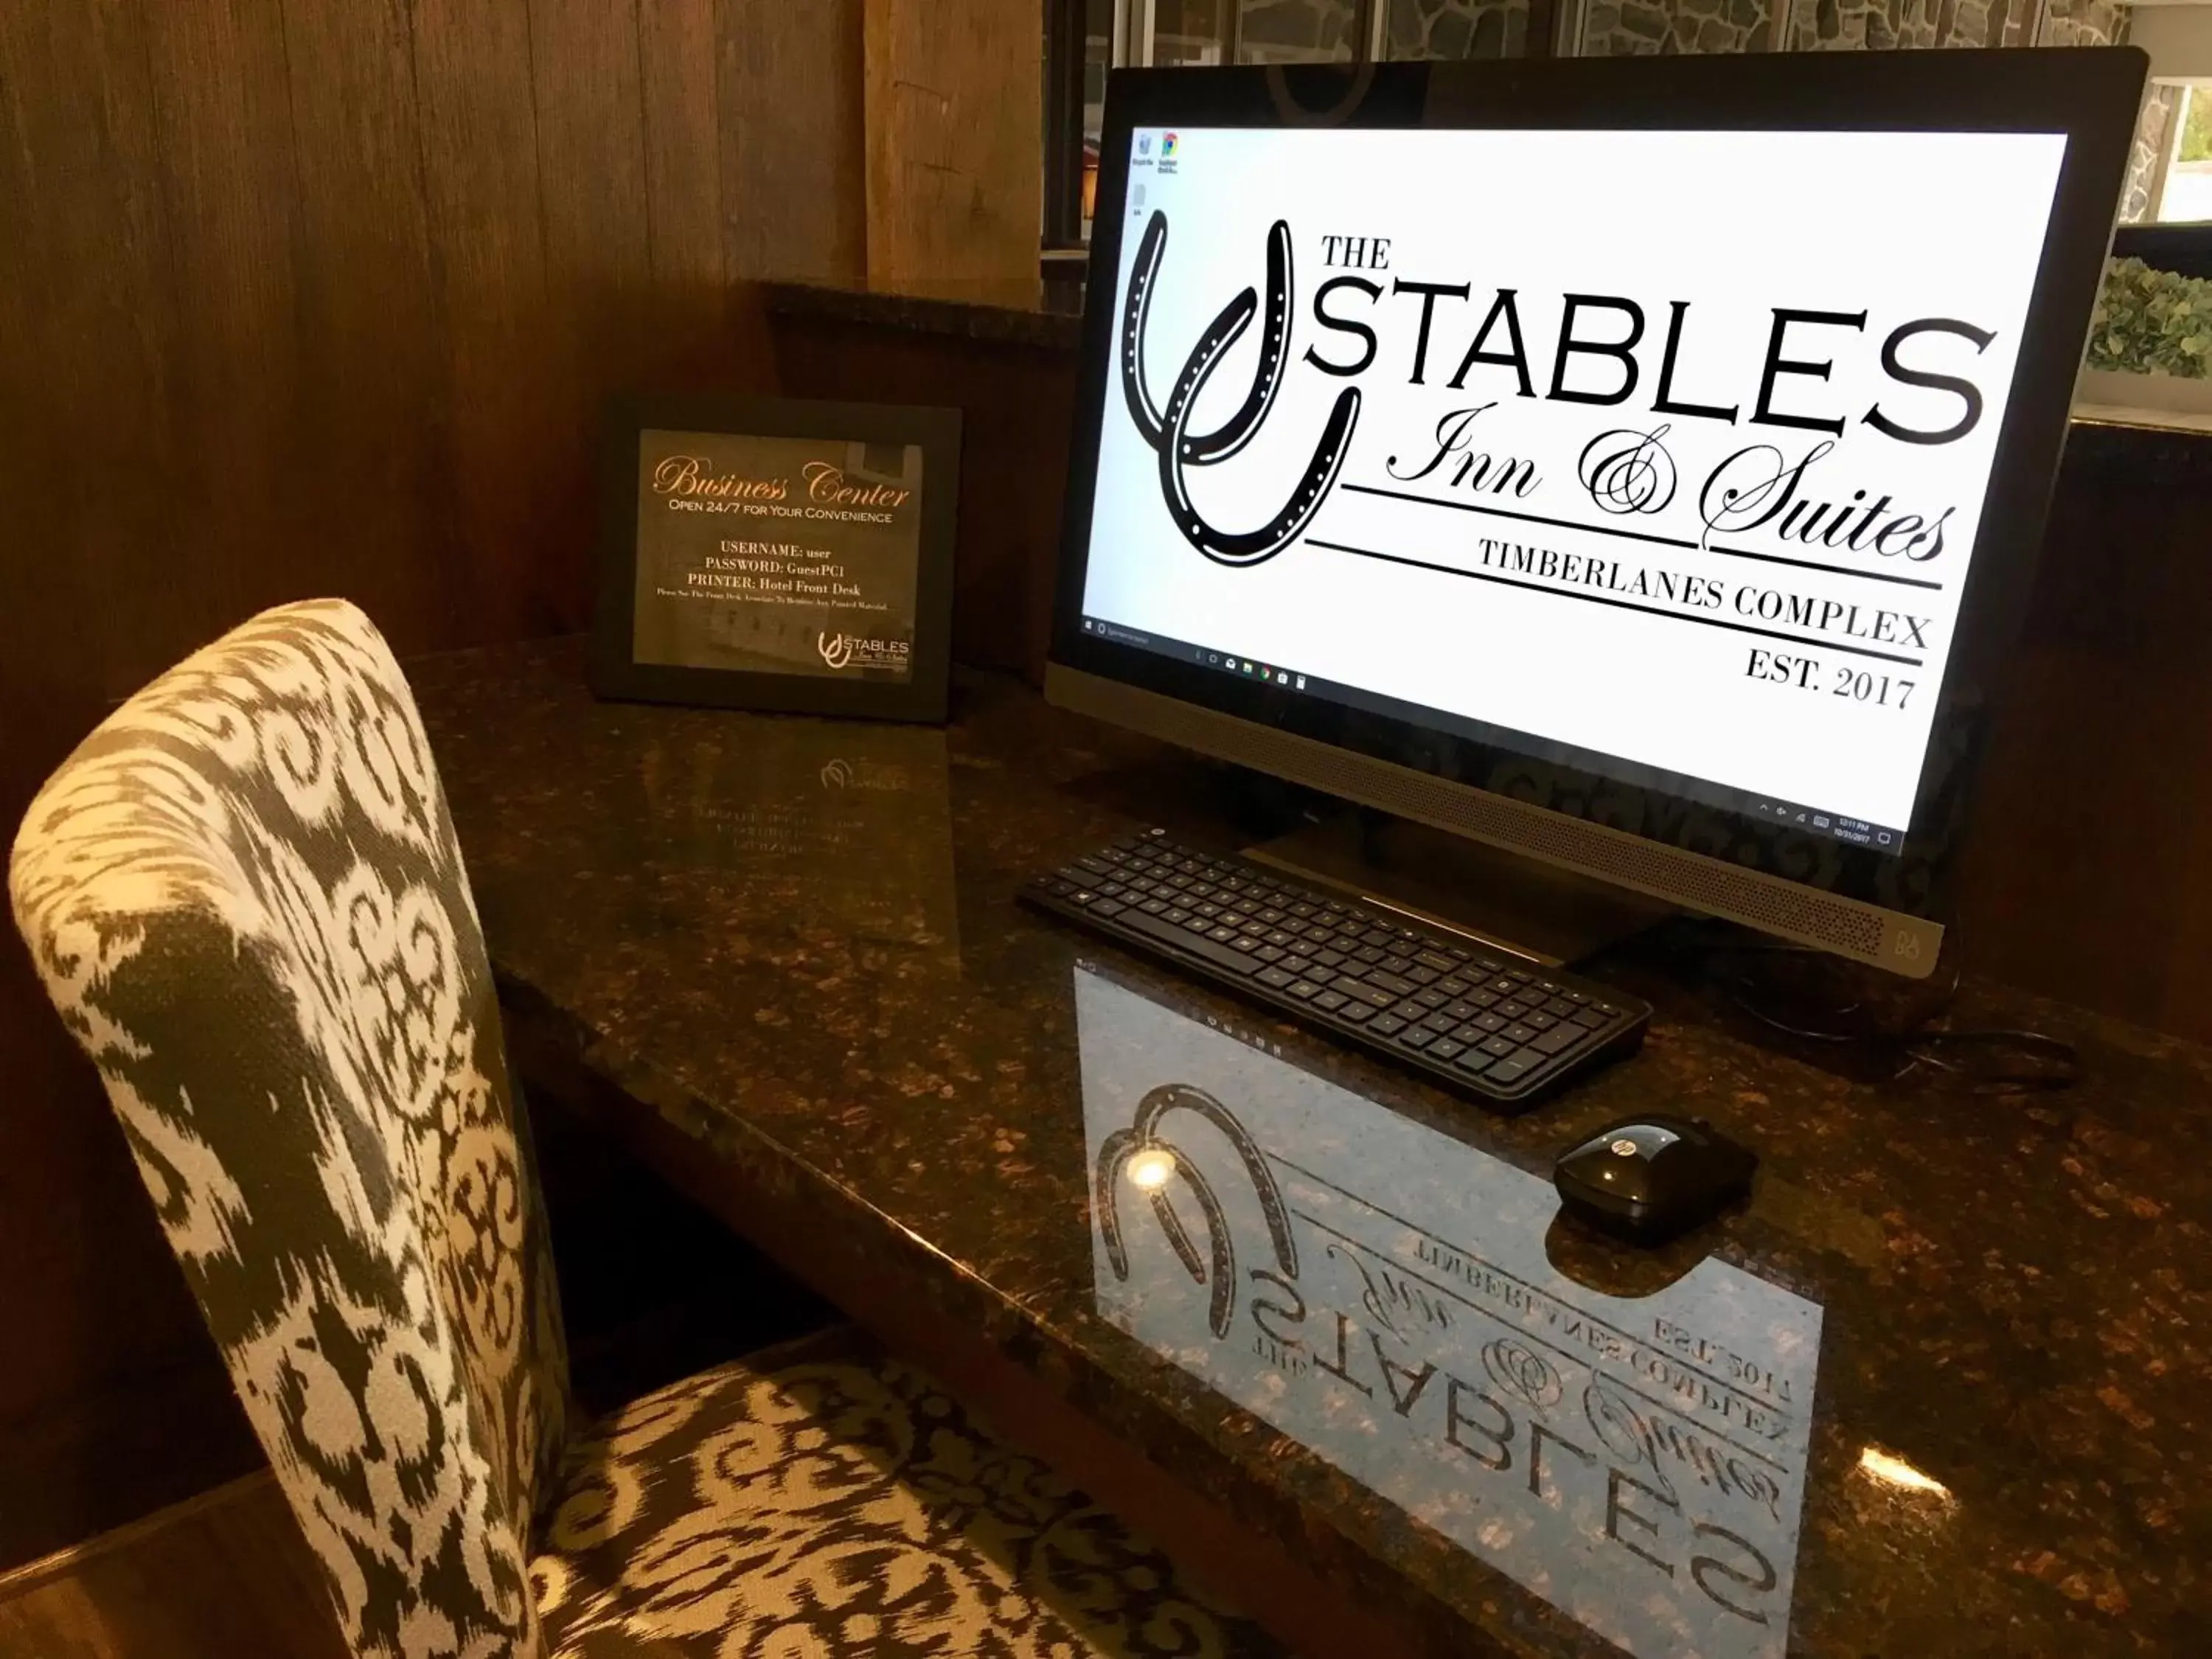 Business facilities in The Stables Inn & Suites